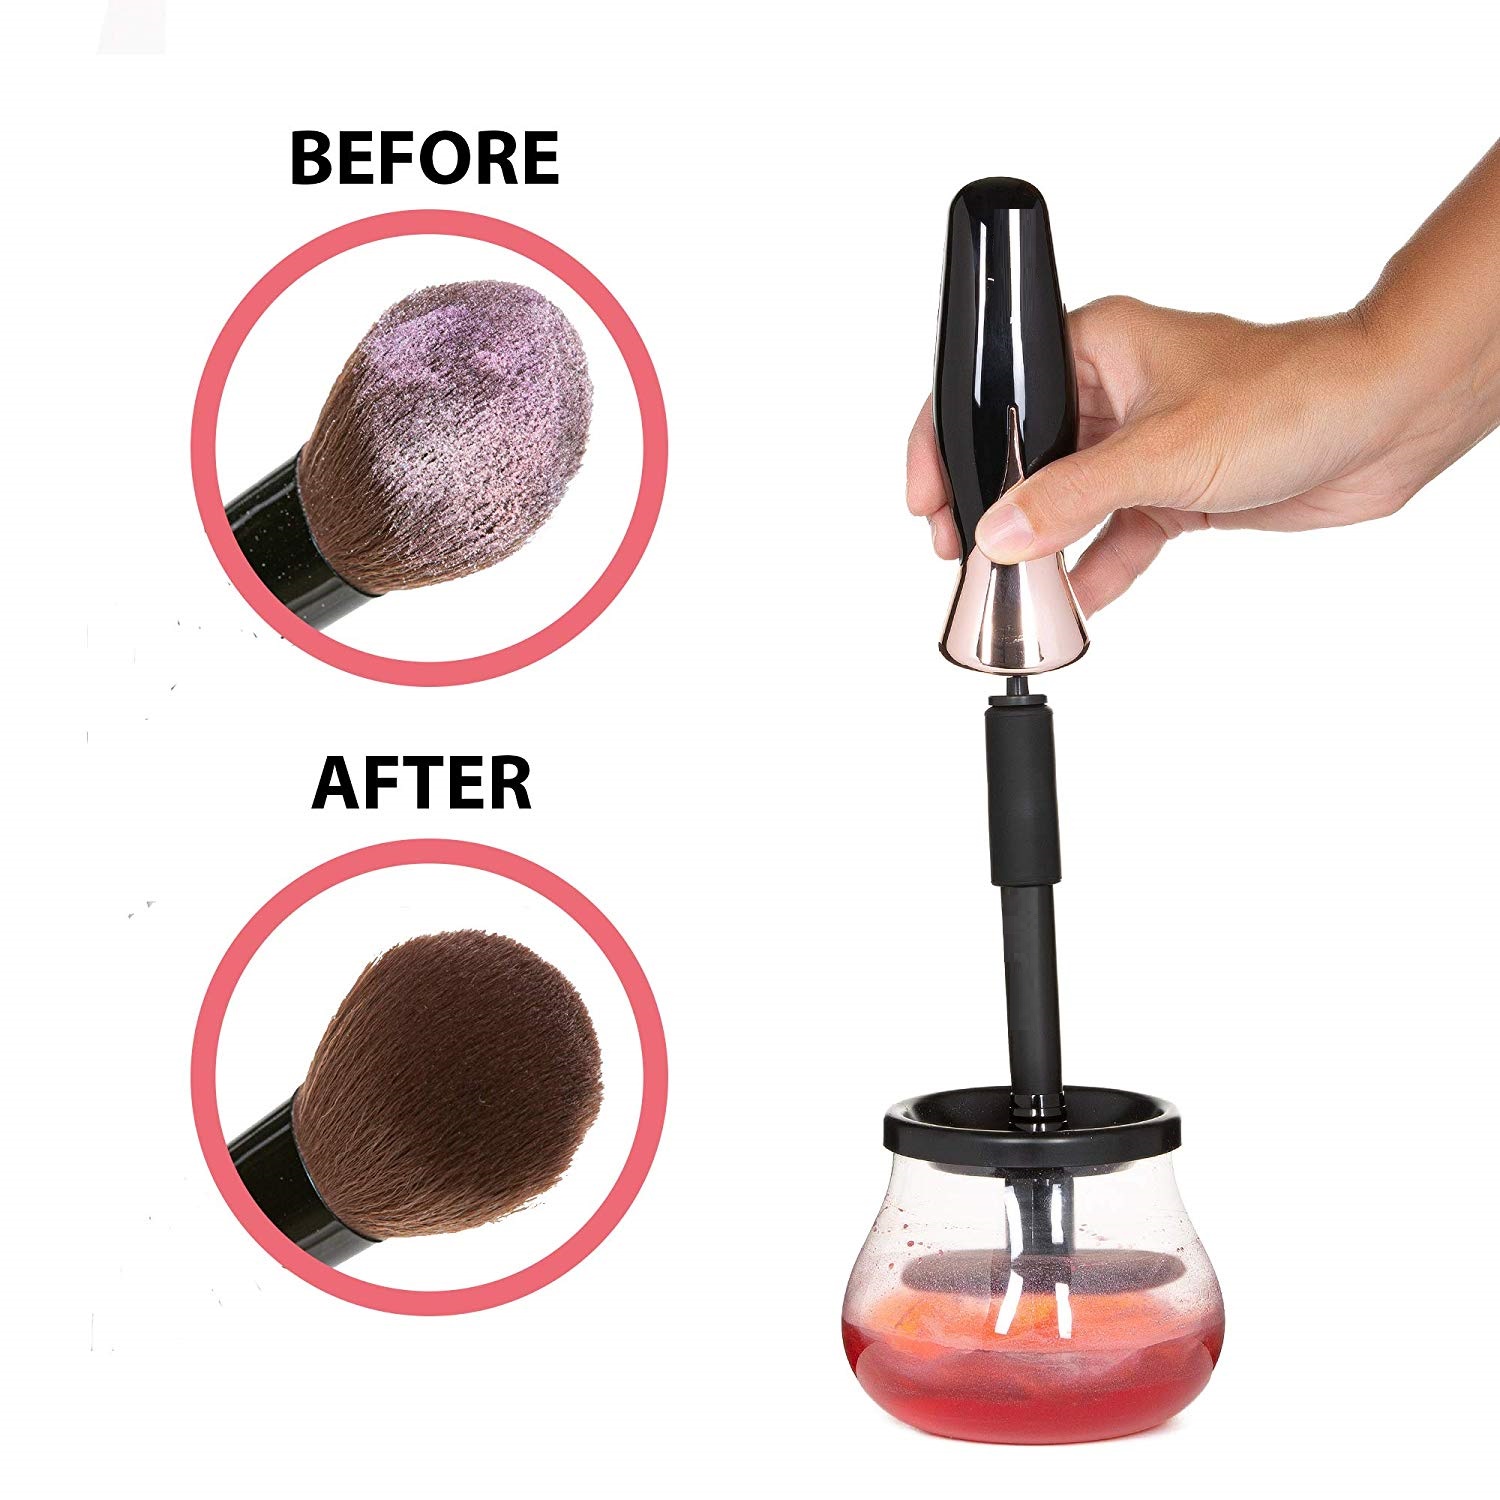 IFINE Beauty personal care beauty equipment pore cleaning hot and cold facial massager vacuum nose blackhead remover